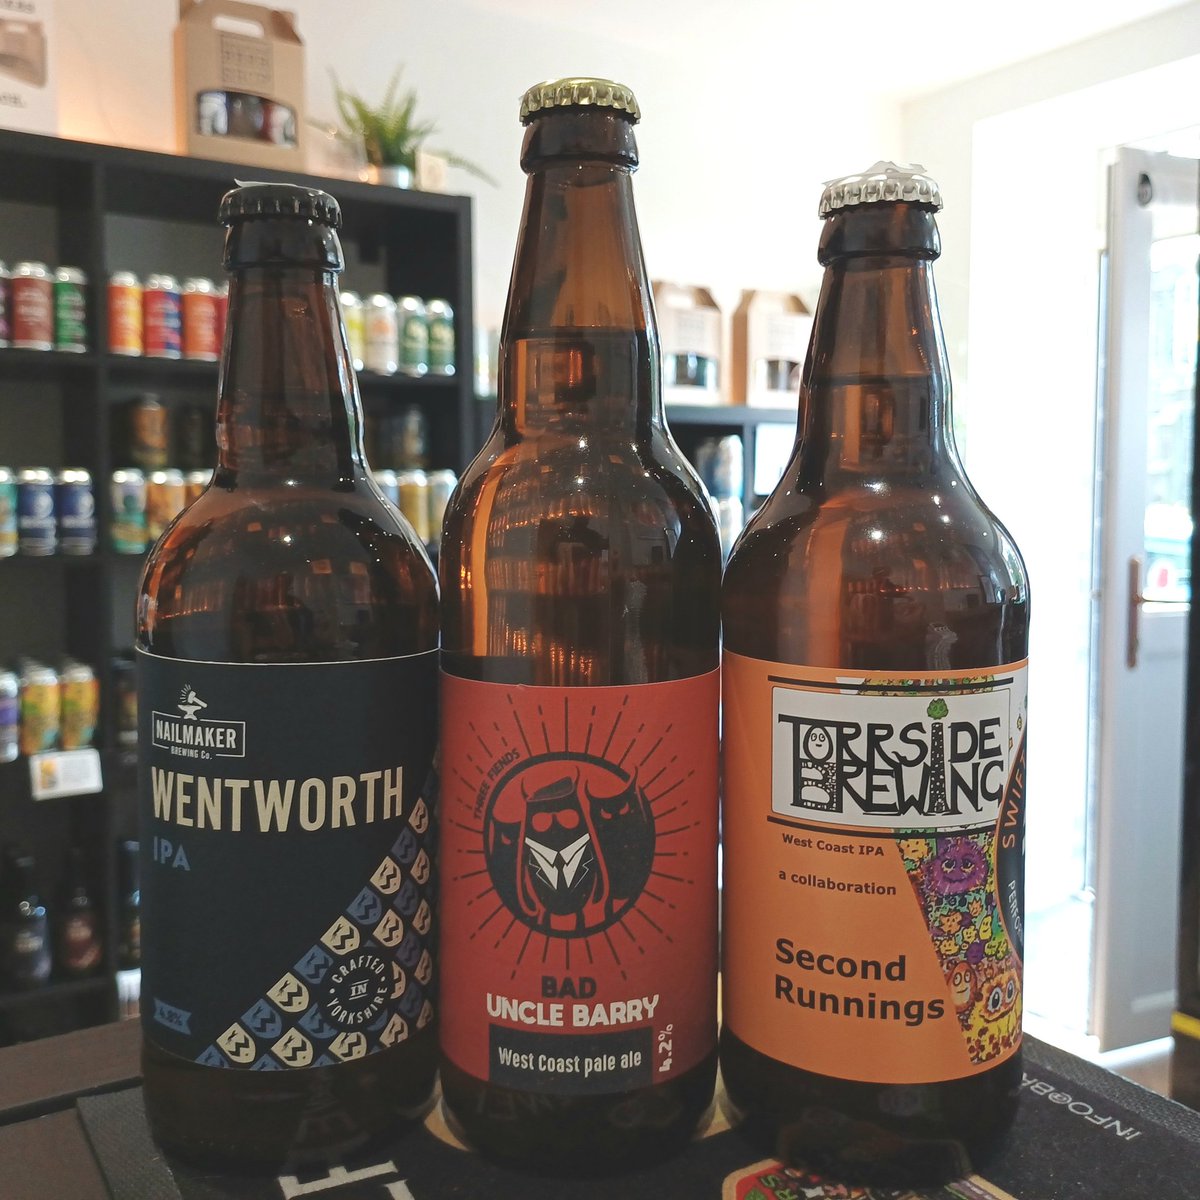 Remember to stay hydrated while watching the London marathon!
Make the most of your Sunday with quality beer! It'll be raining tomorrow. 
Open now until 4pm. 🍻
 #craftnotcrap #barnsleyisbrill #beeroclock #sheffieldissuper #indiebeershop #shoplocal